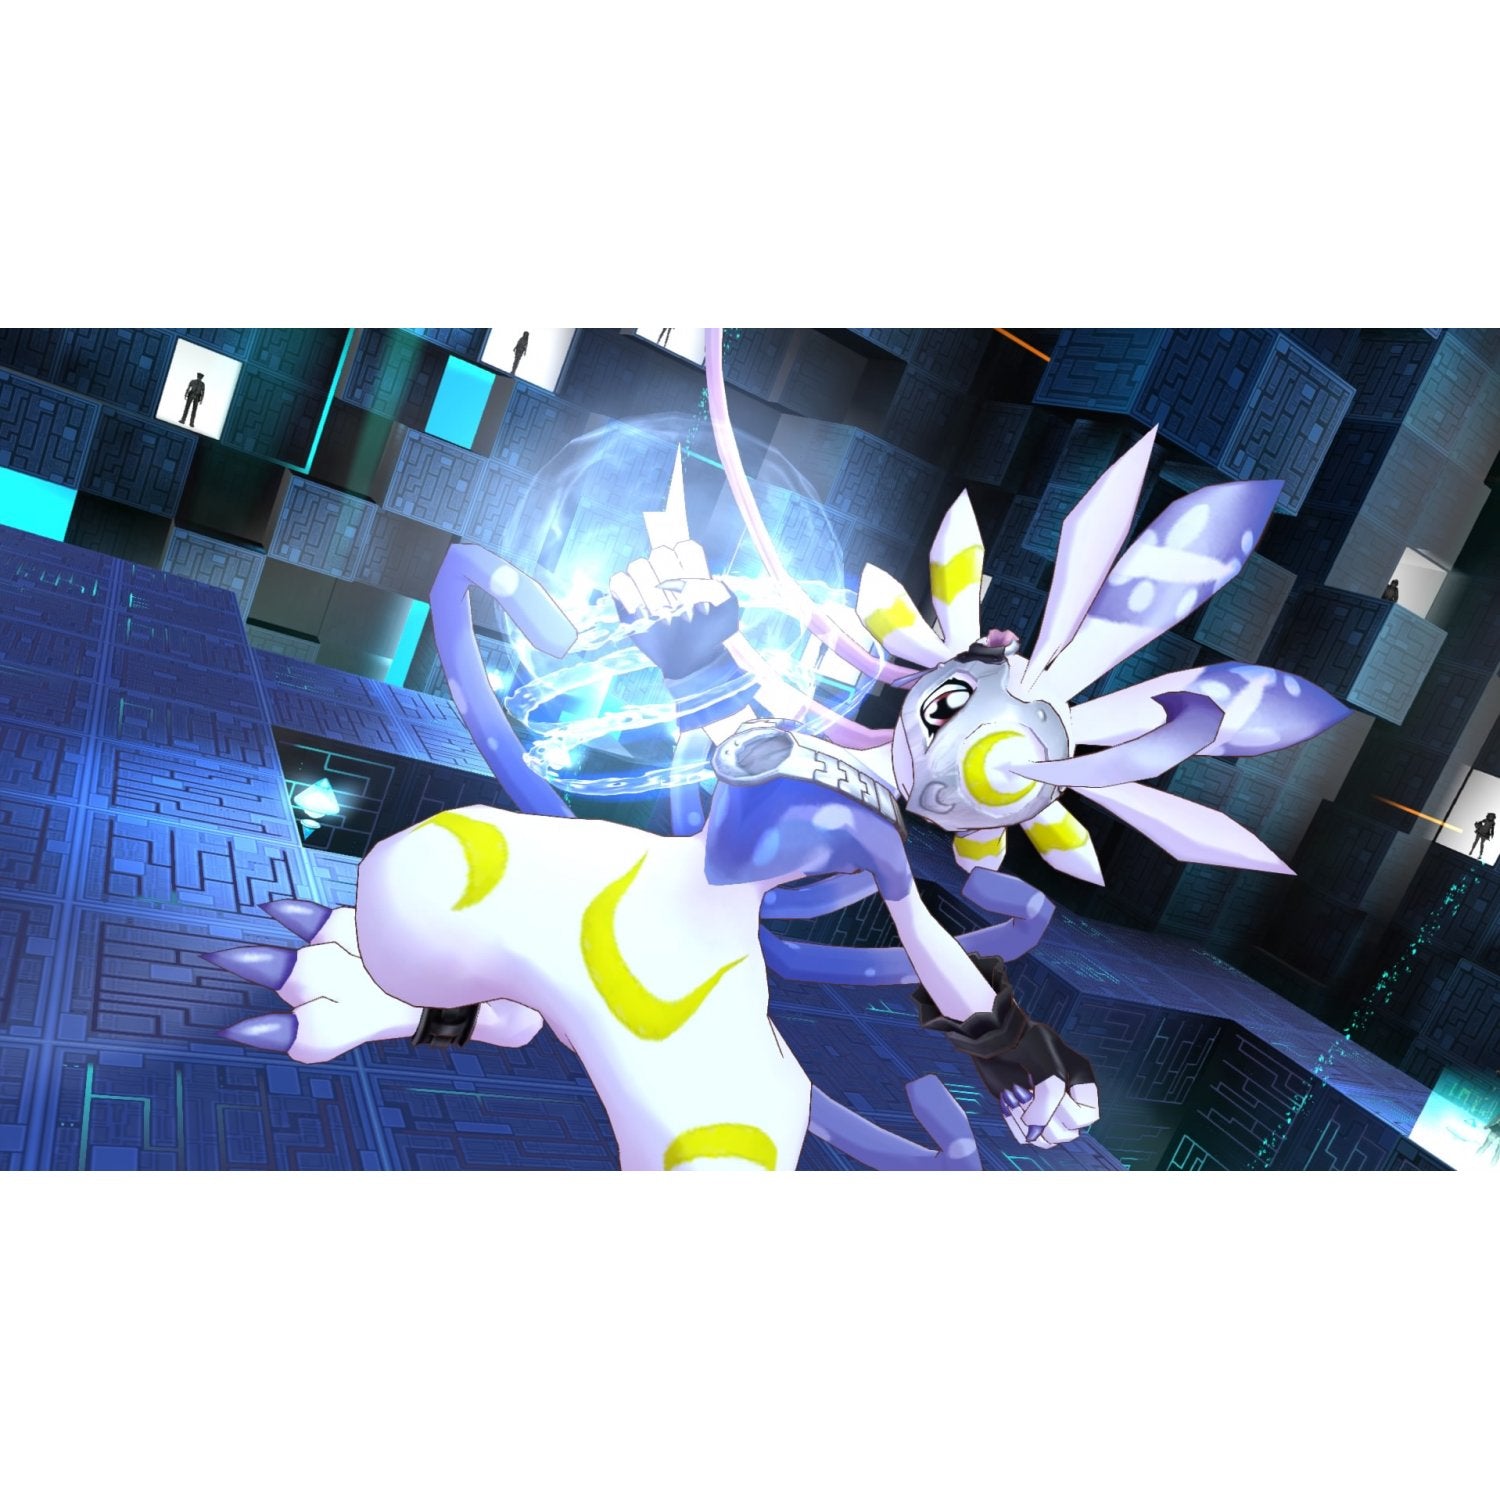 PS4 Digimon Story Cyber Sleuth: Hacker's Memory